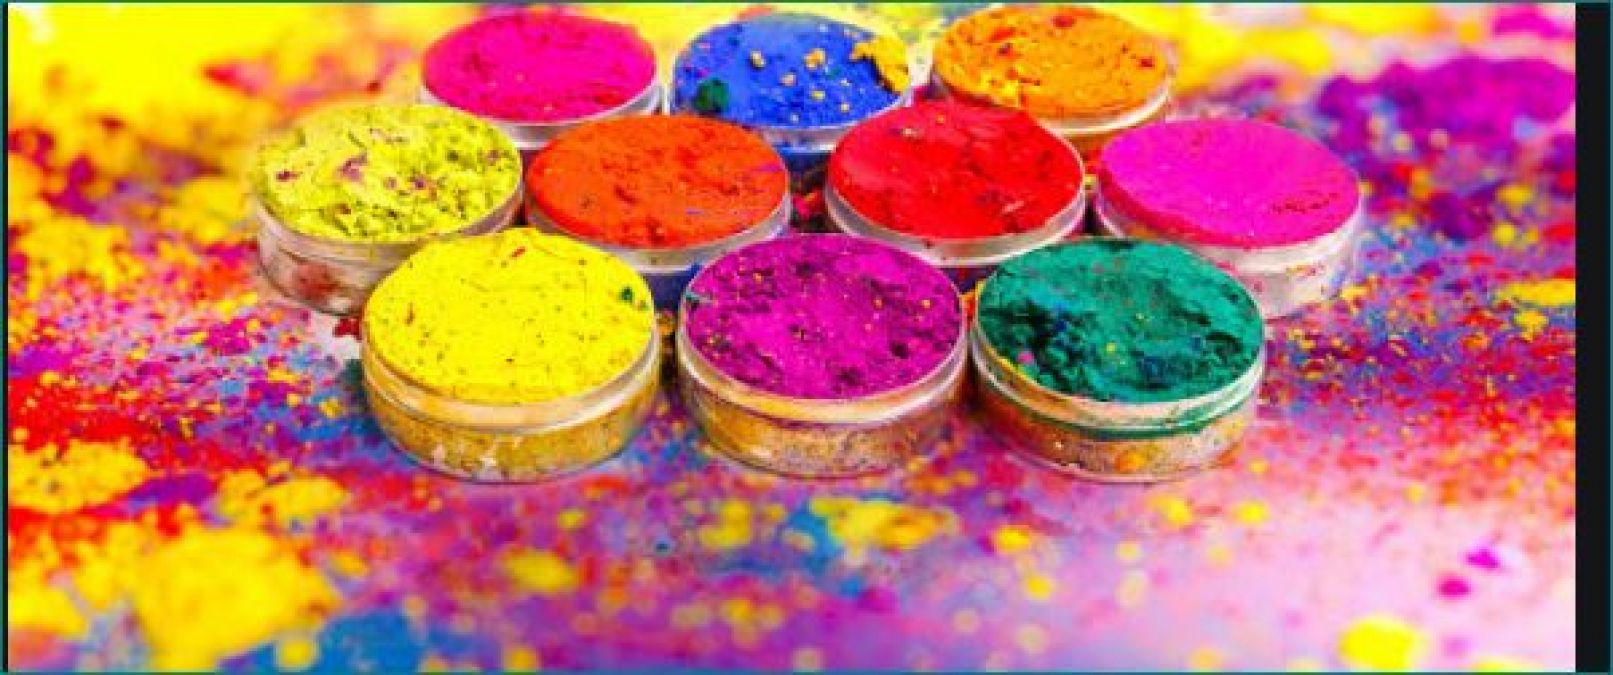 Play 'Colorful Holi' in midst of corona phase keeping these things in mind